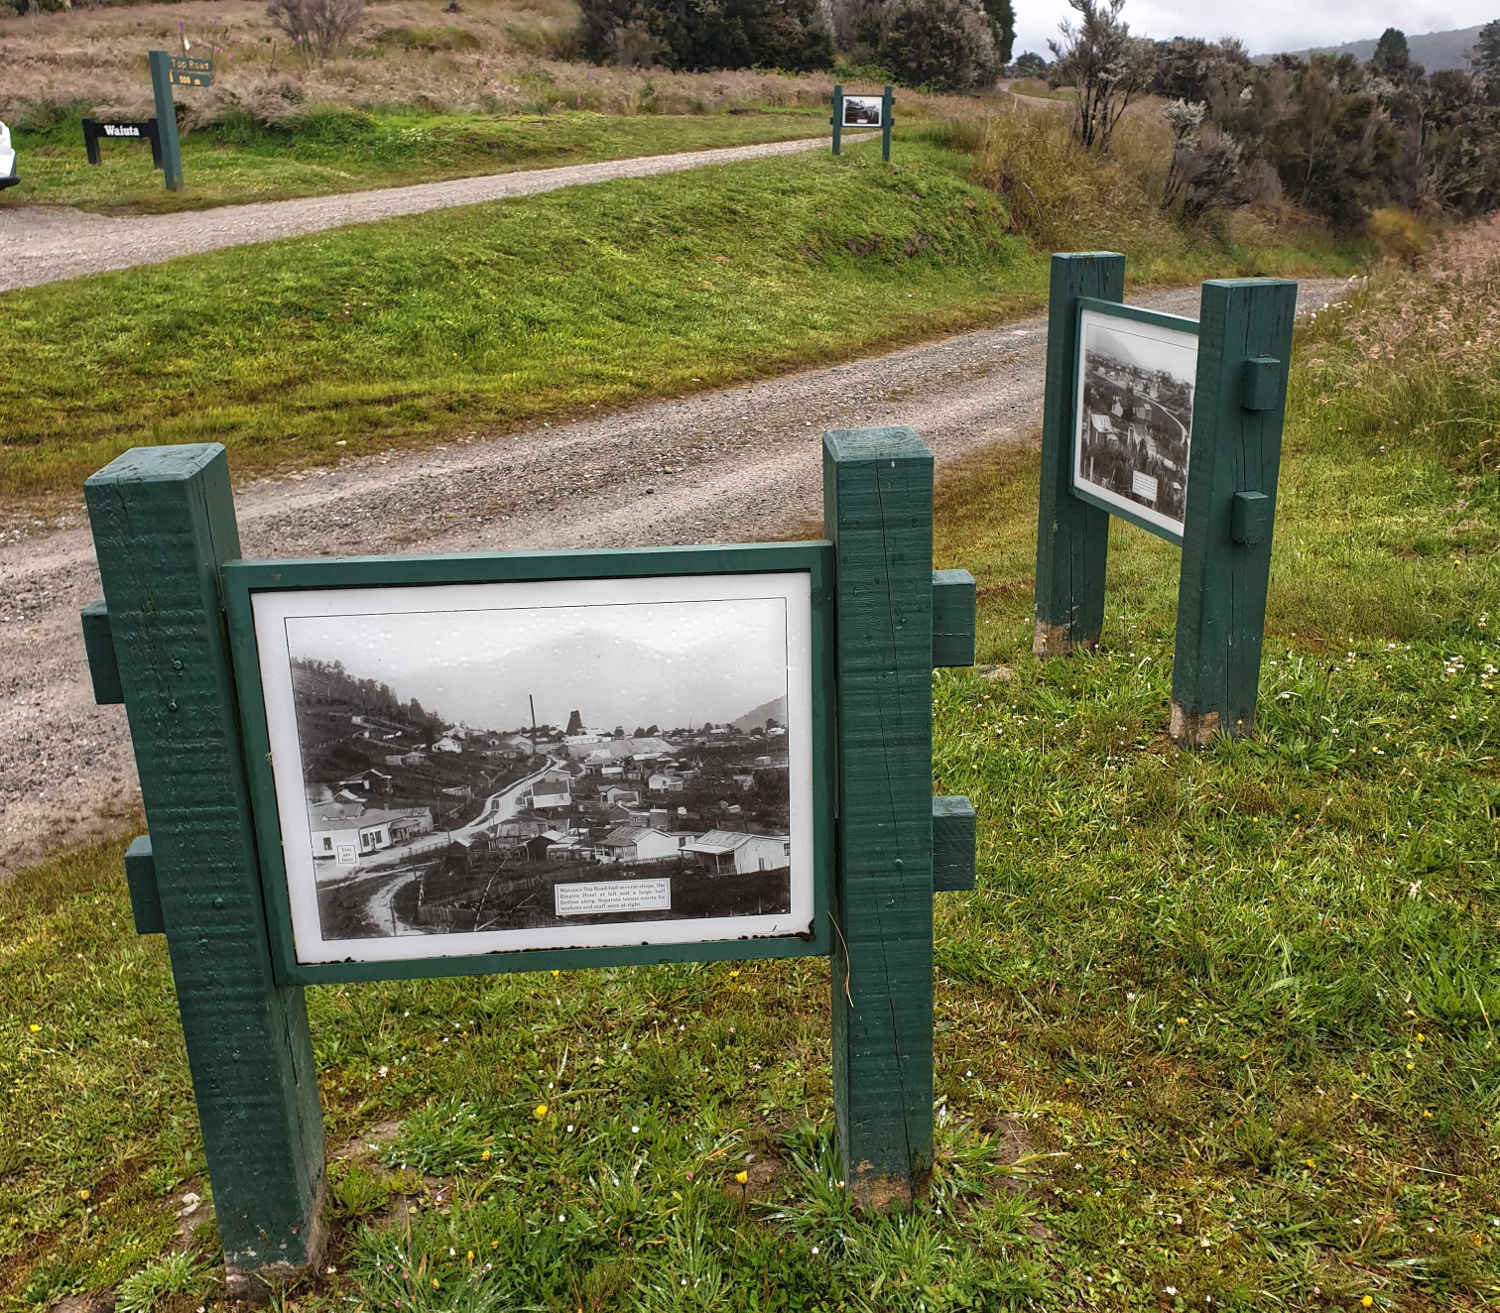 Waiuta photos placed in situa representing former buildings and activity